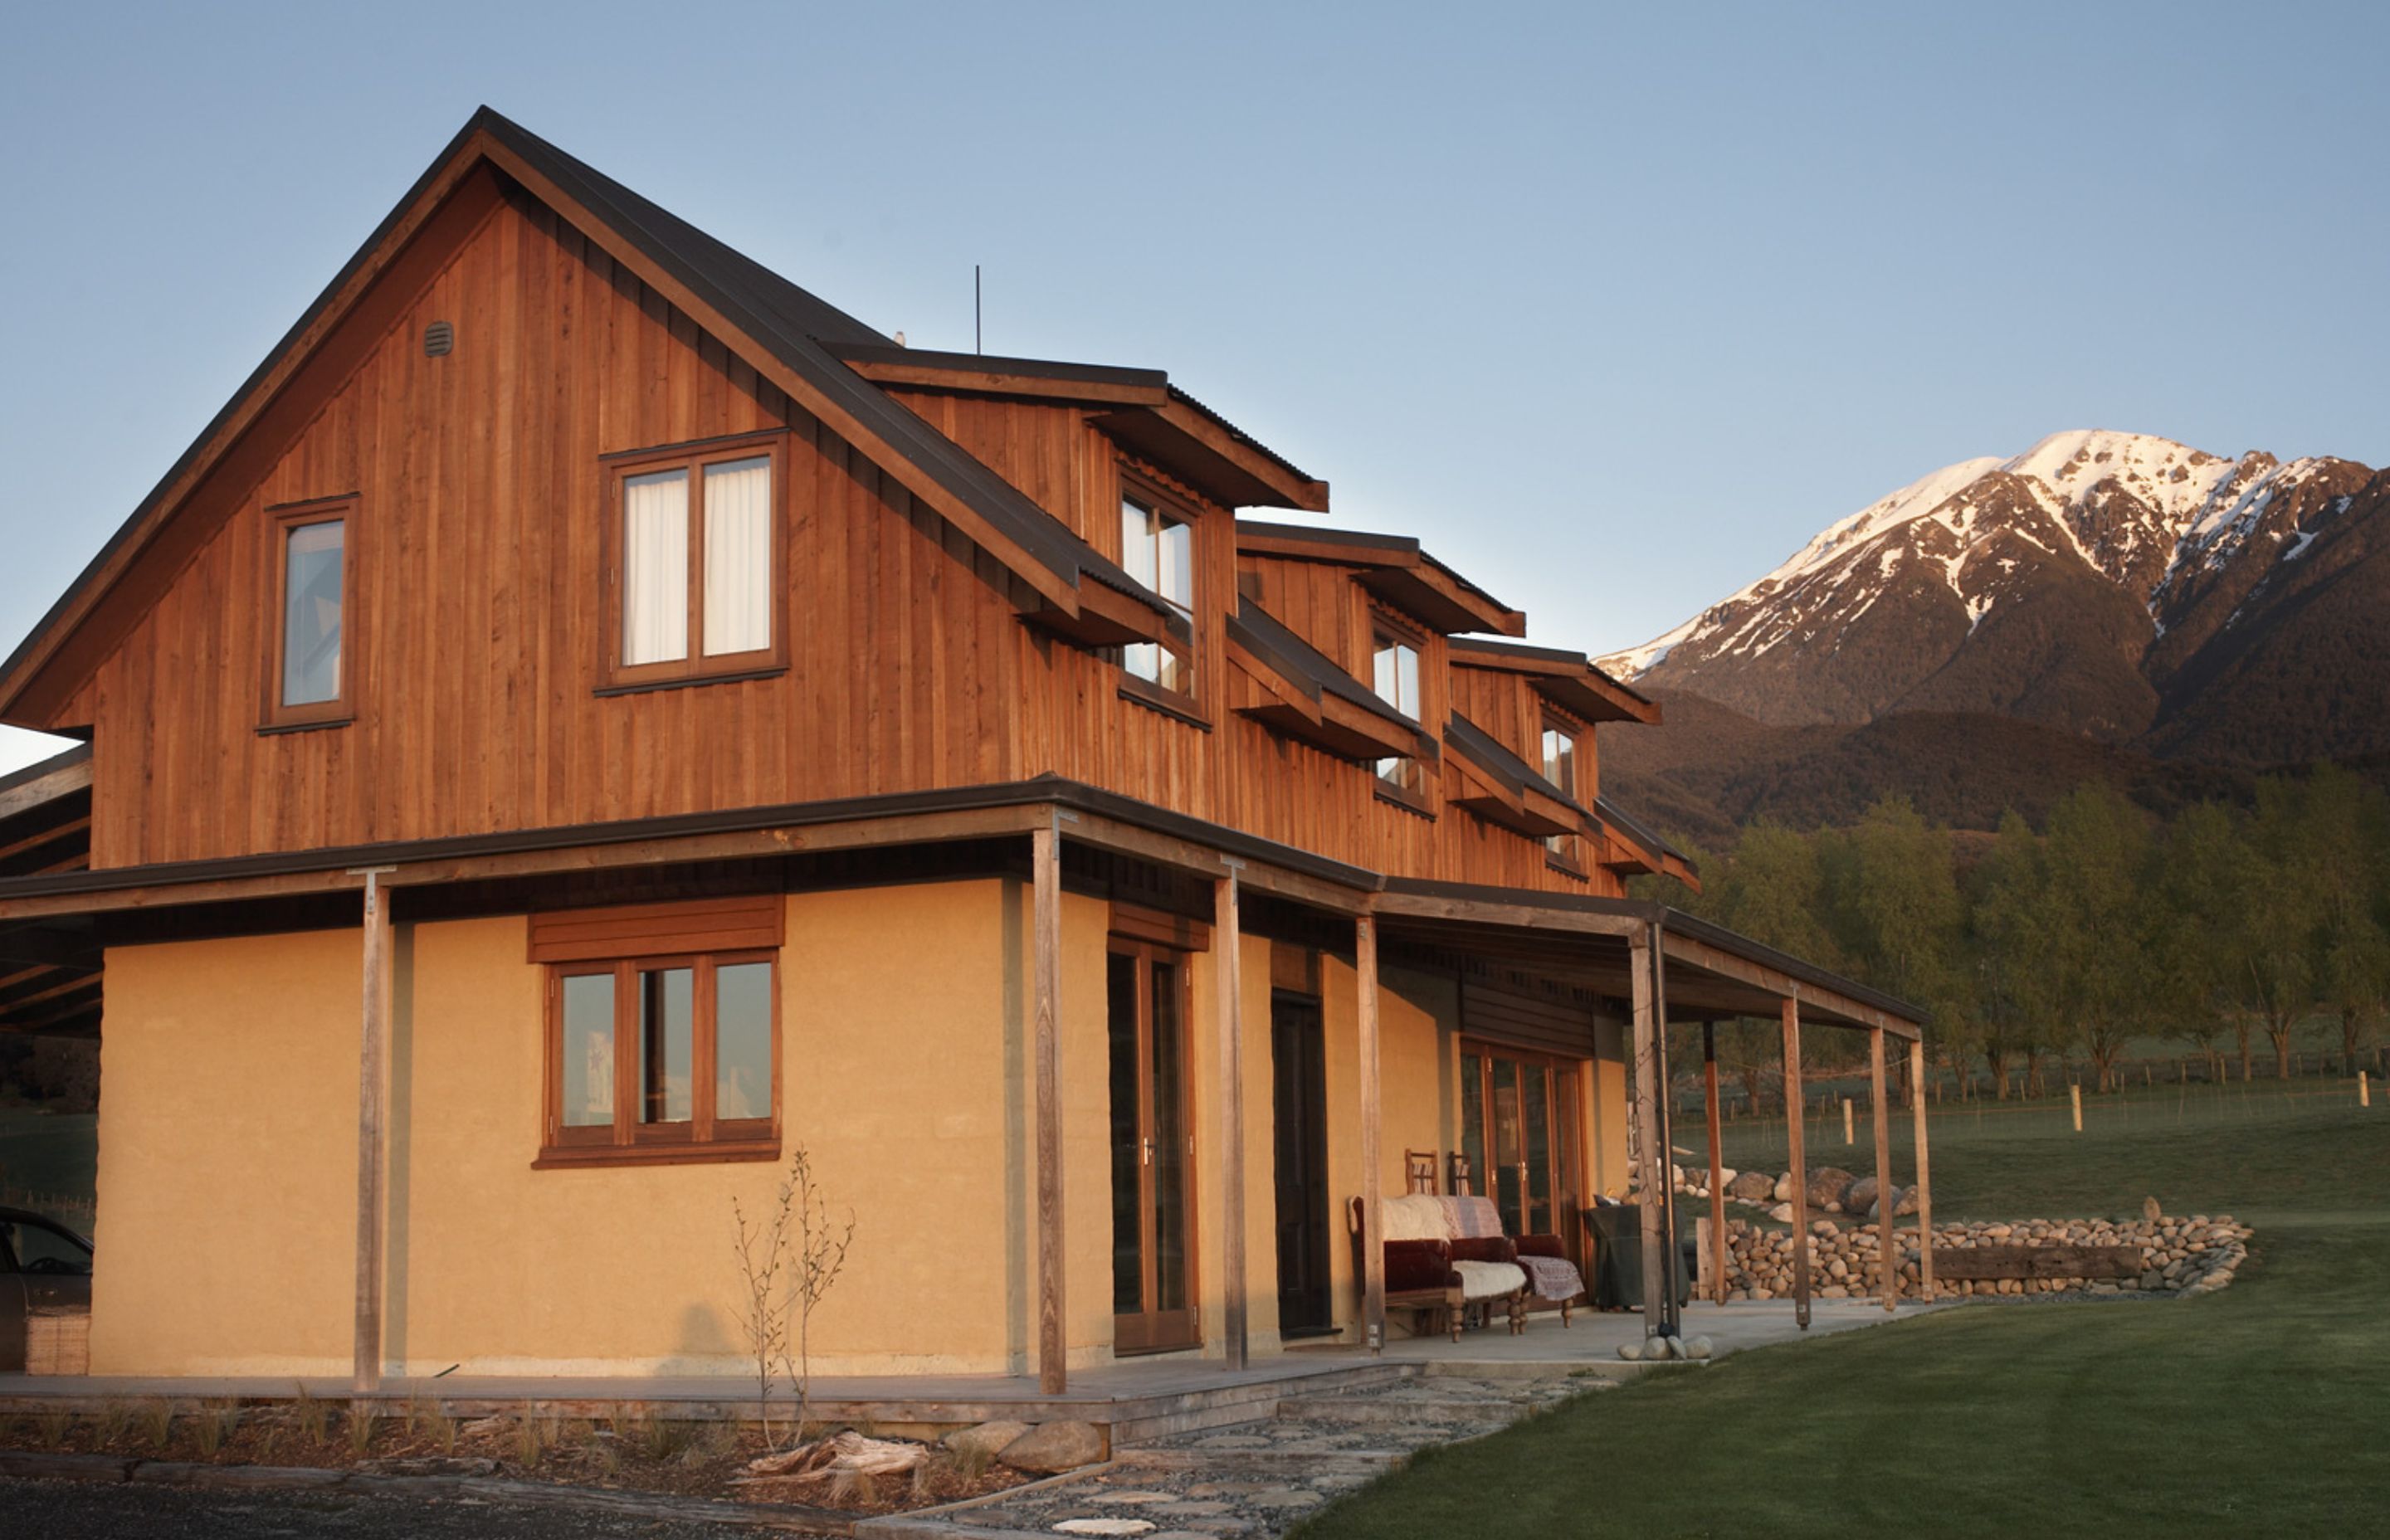 Adobe is a more sustainable option compared to most conventional building systems.